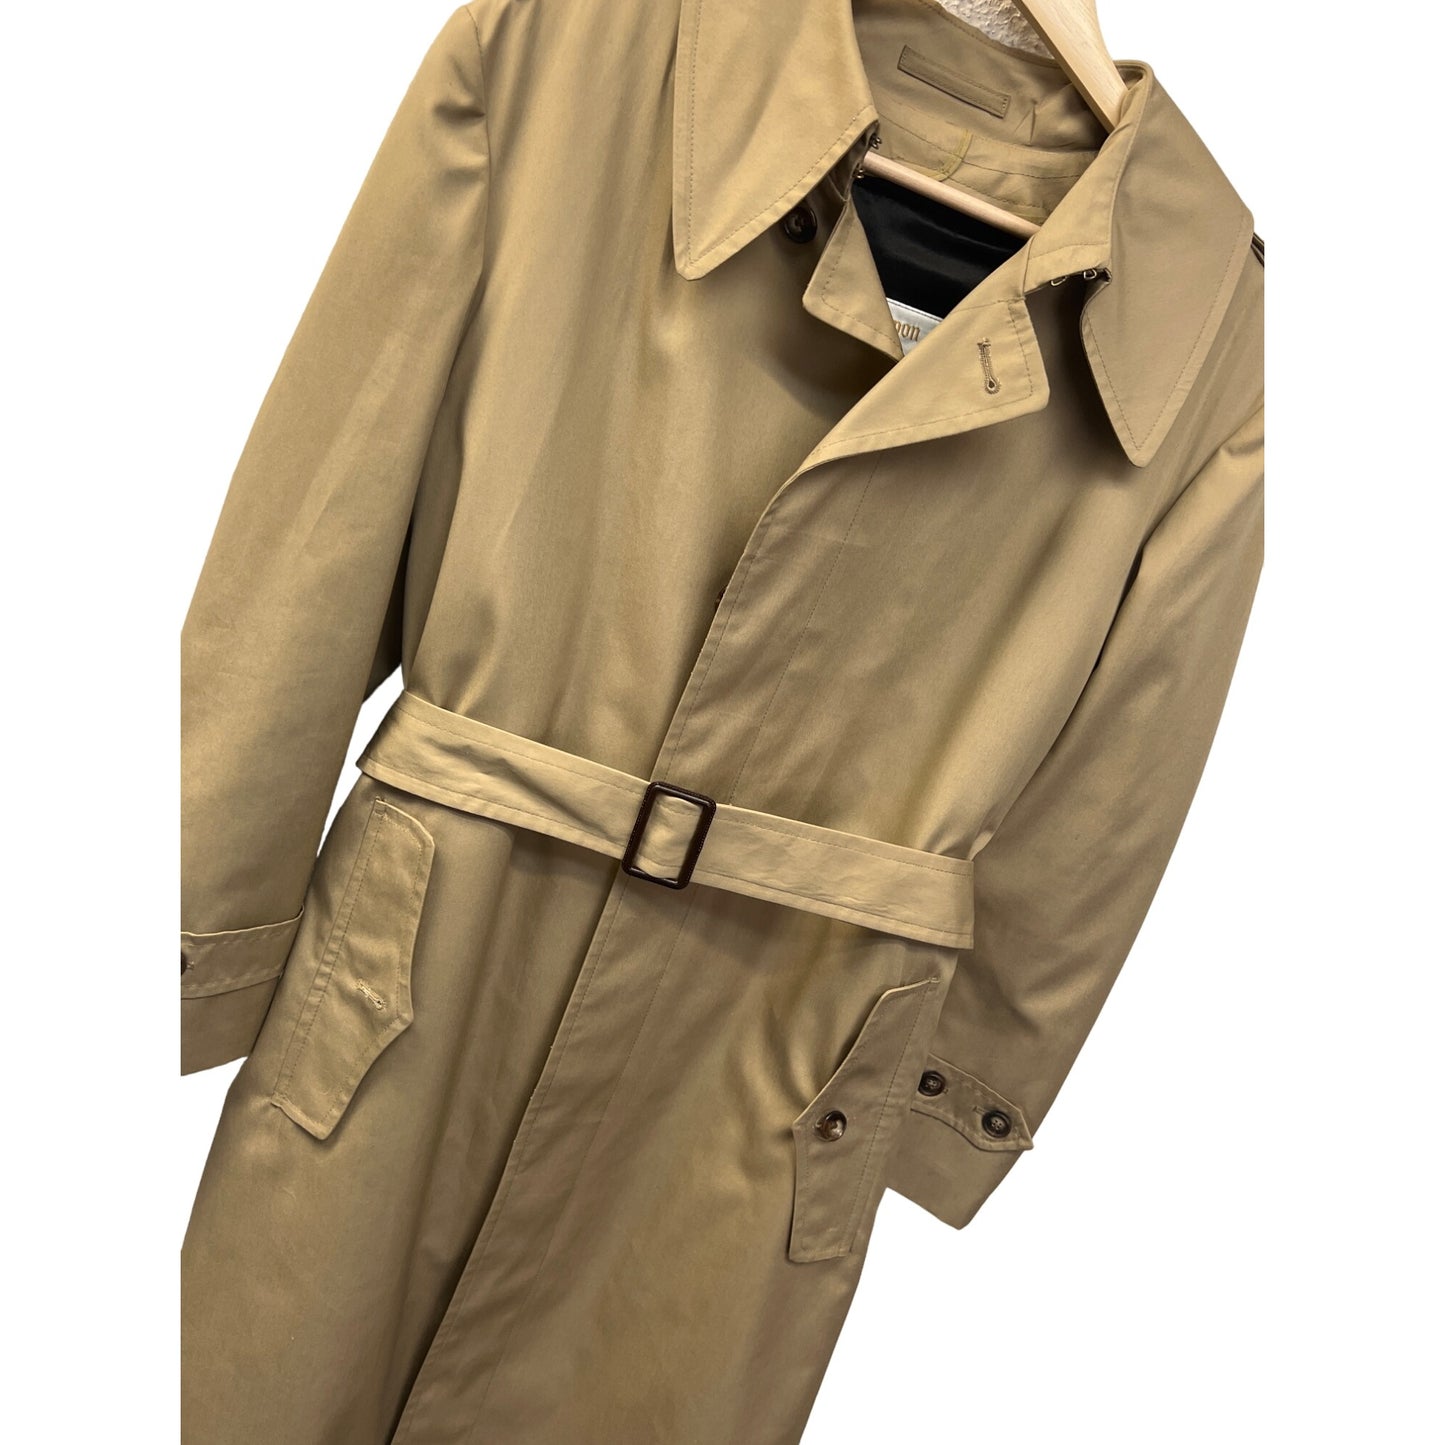 London Fog Vintage Tan Trench Coat with Removeable Plaid Wool Lining